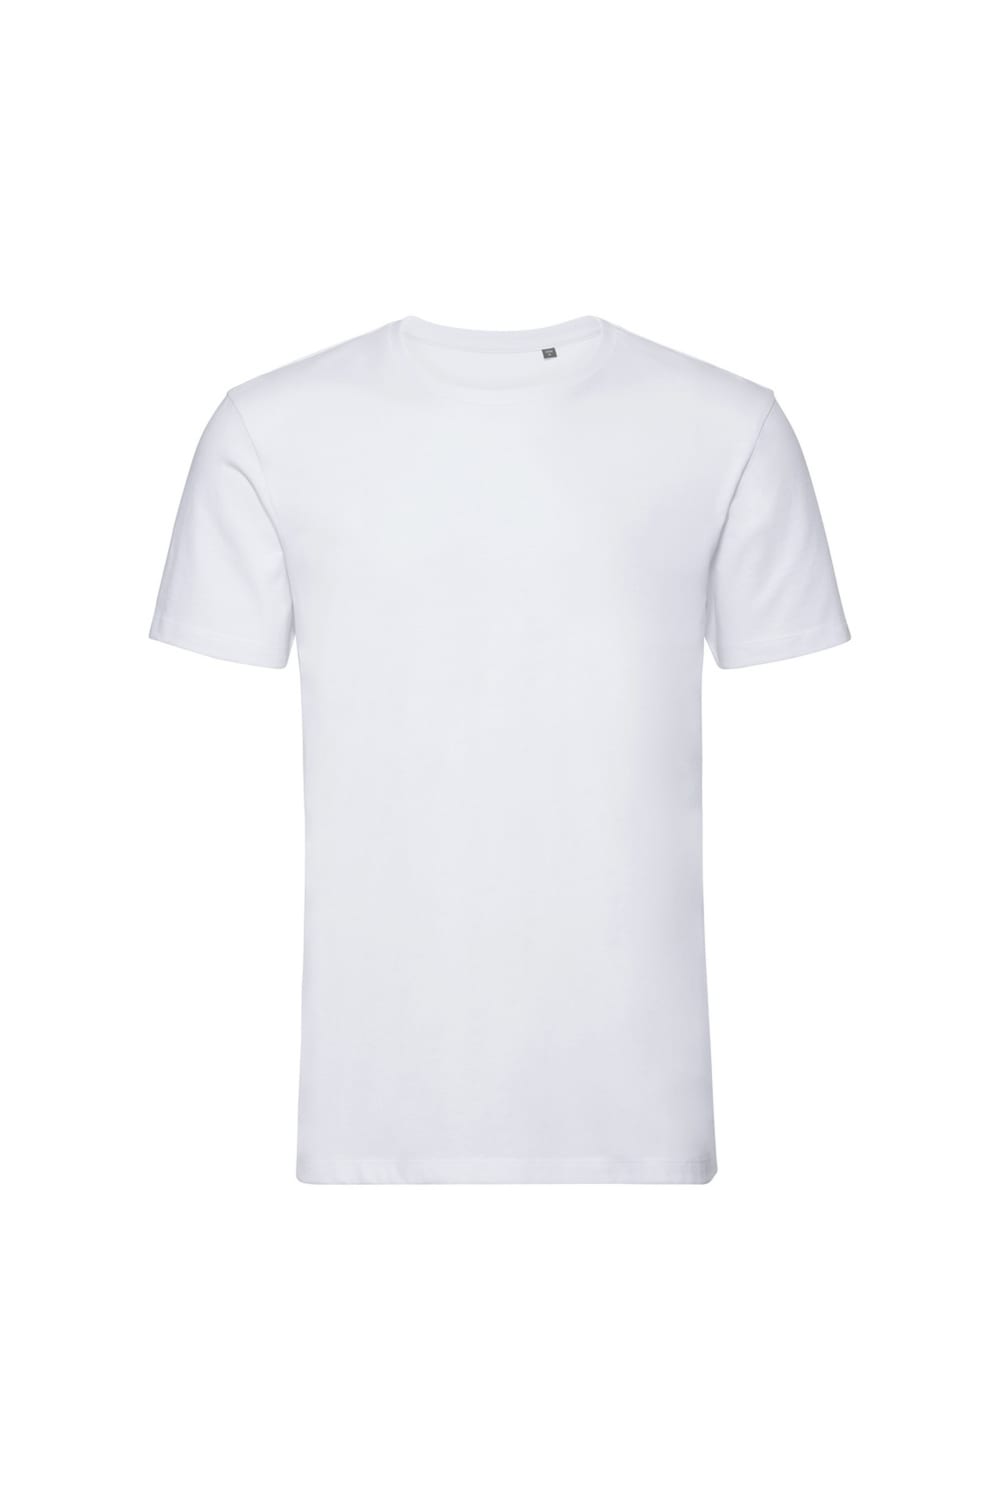 Russell Mens Authentic Pure Organic T-Shirt (White)